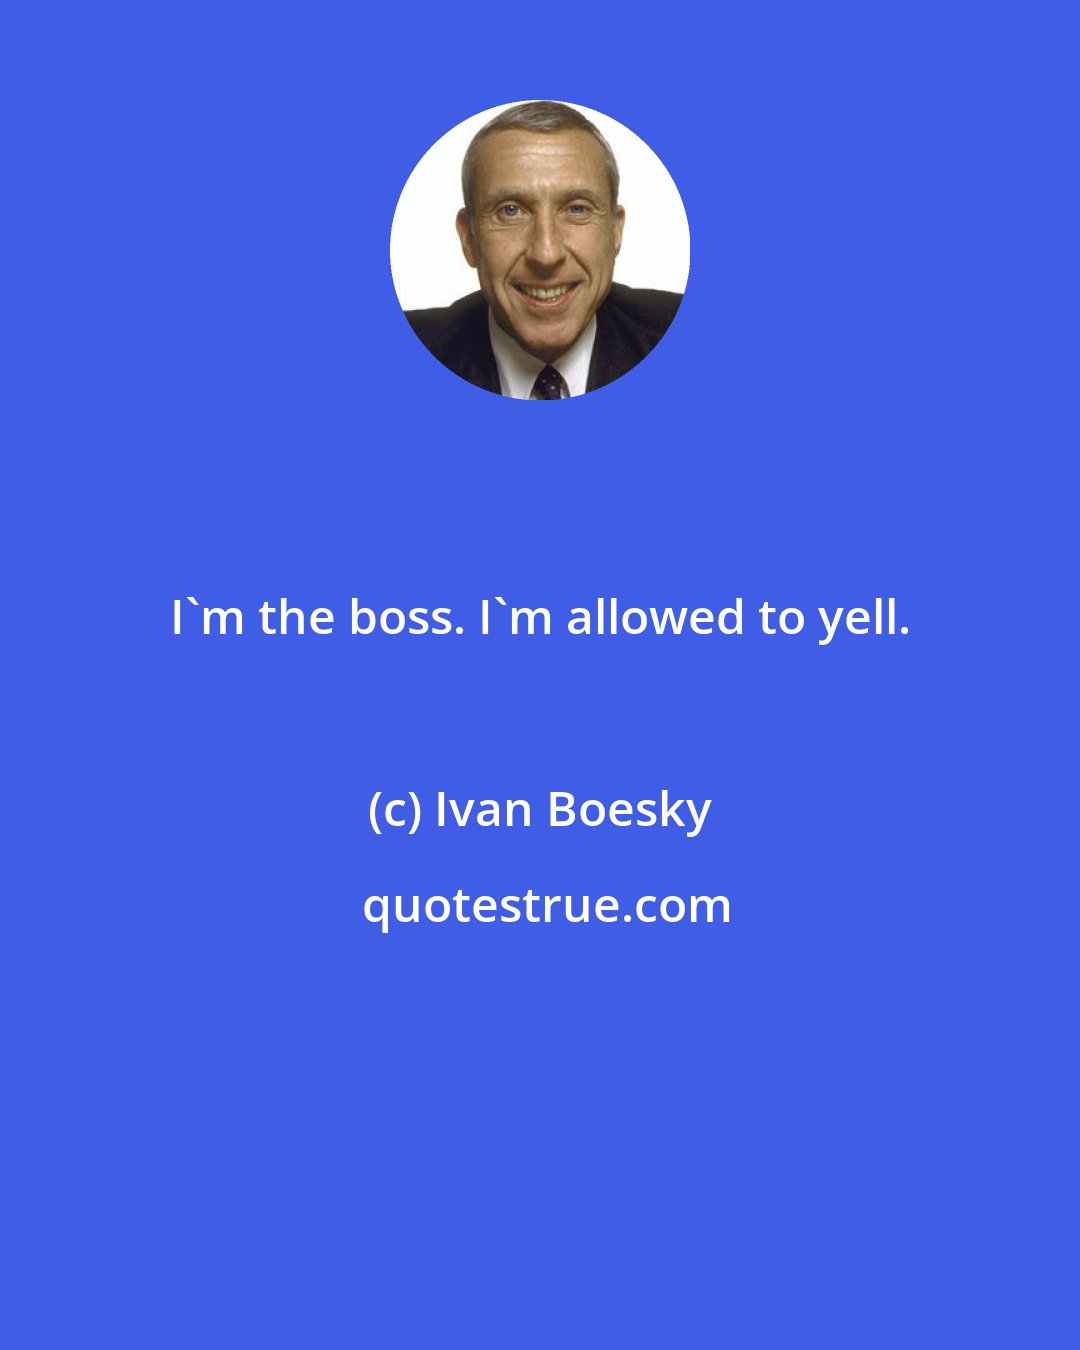 Ivan Boesky: I'm the boss. I'm allowed to yell.